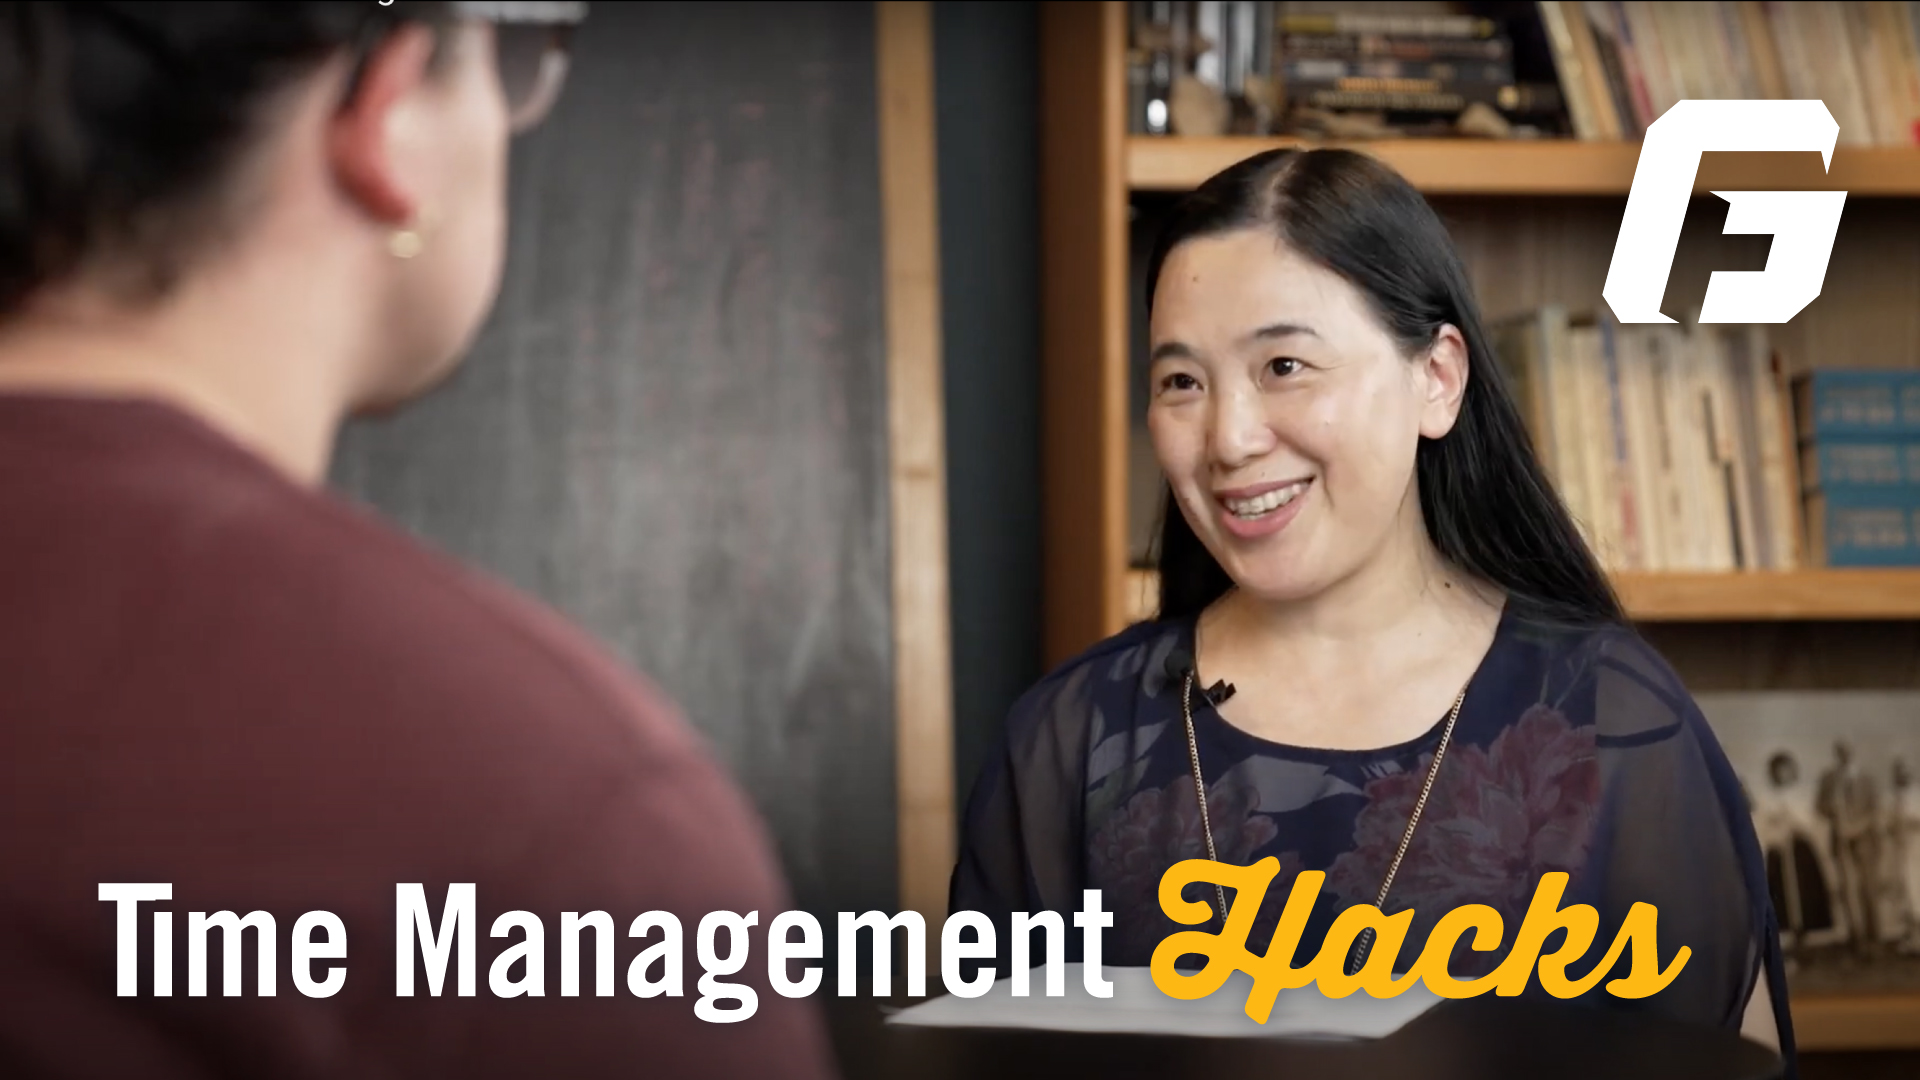 Watch video: Hacks for Time Management